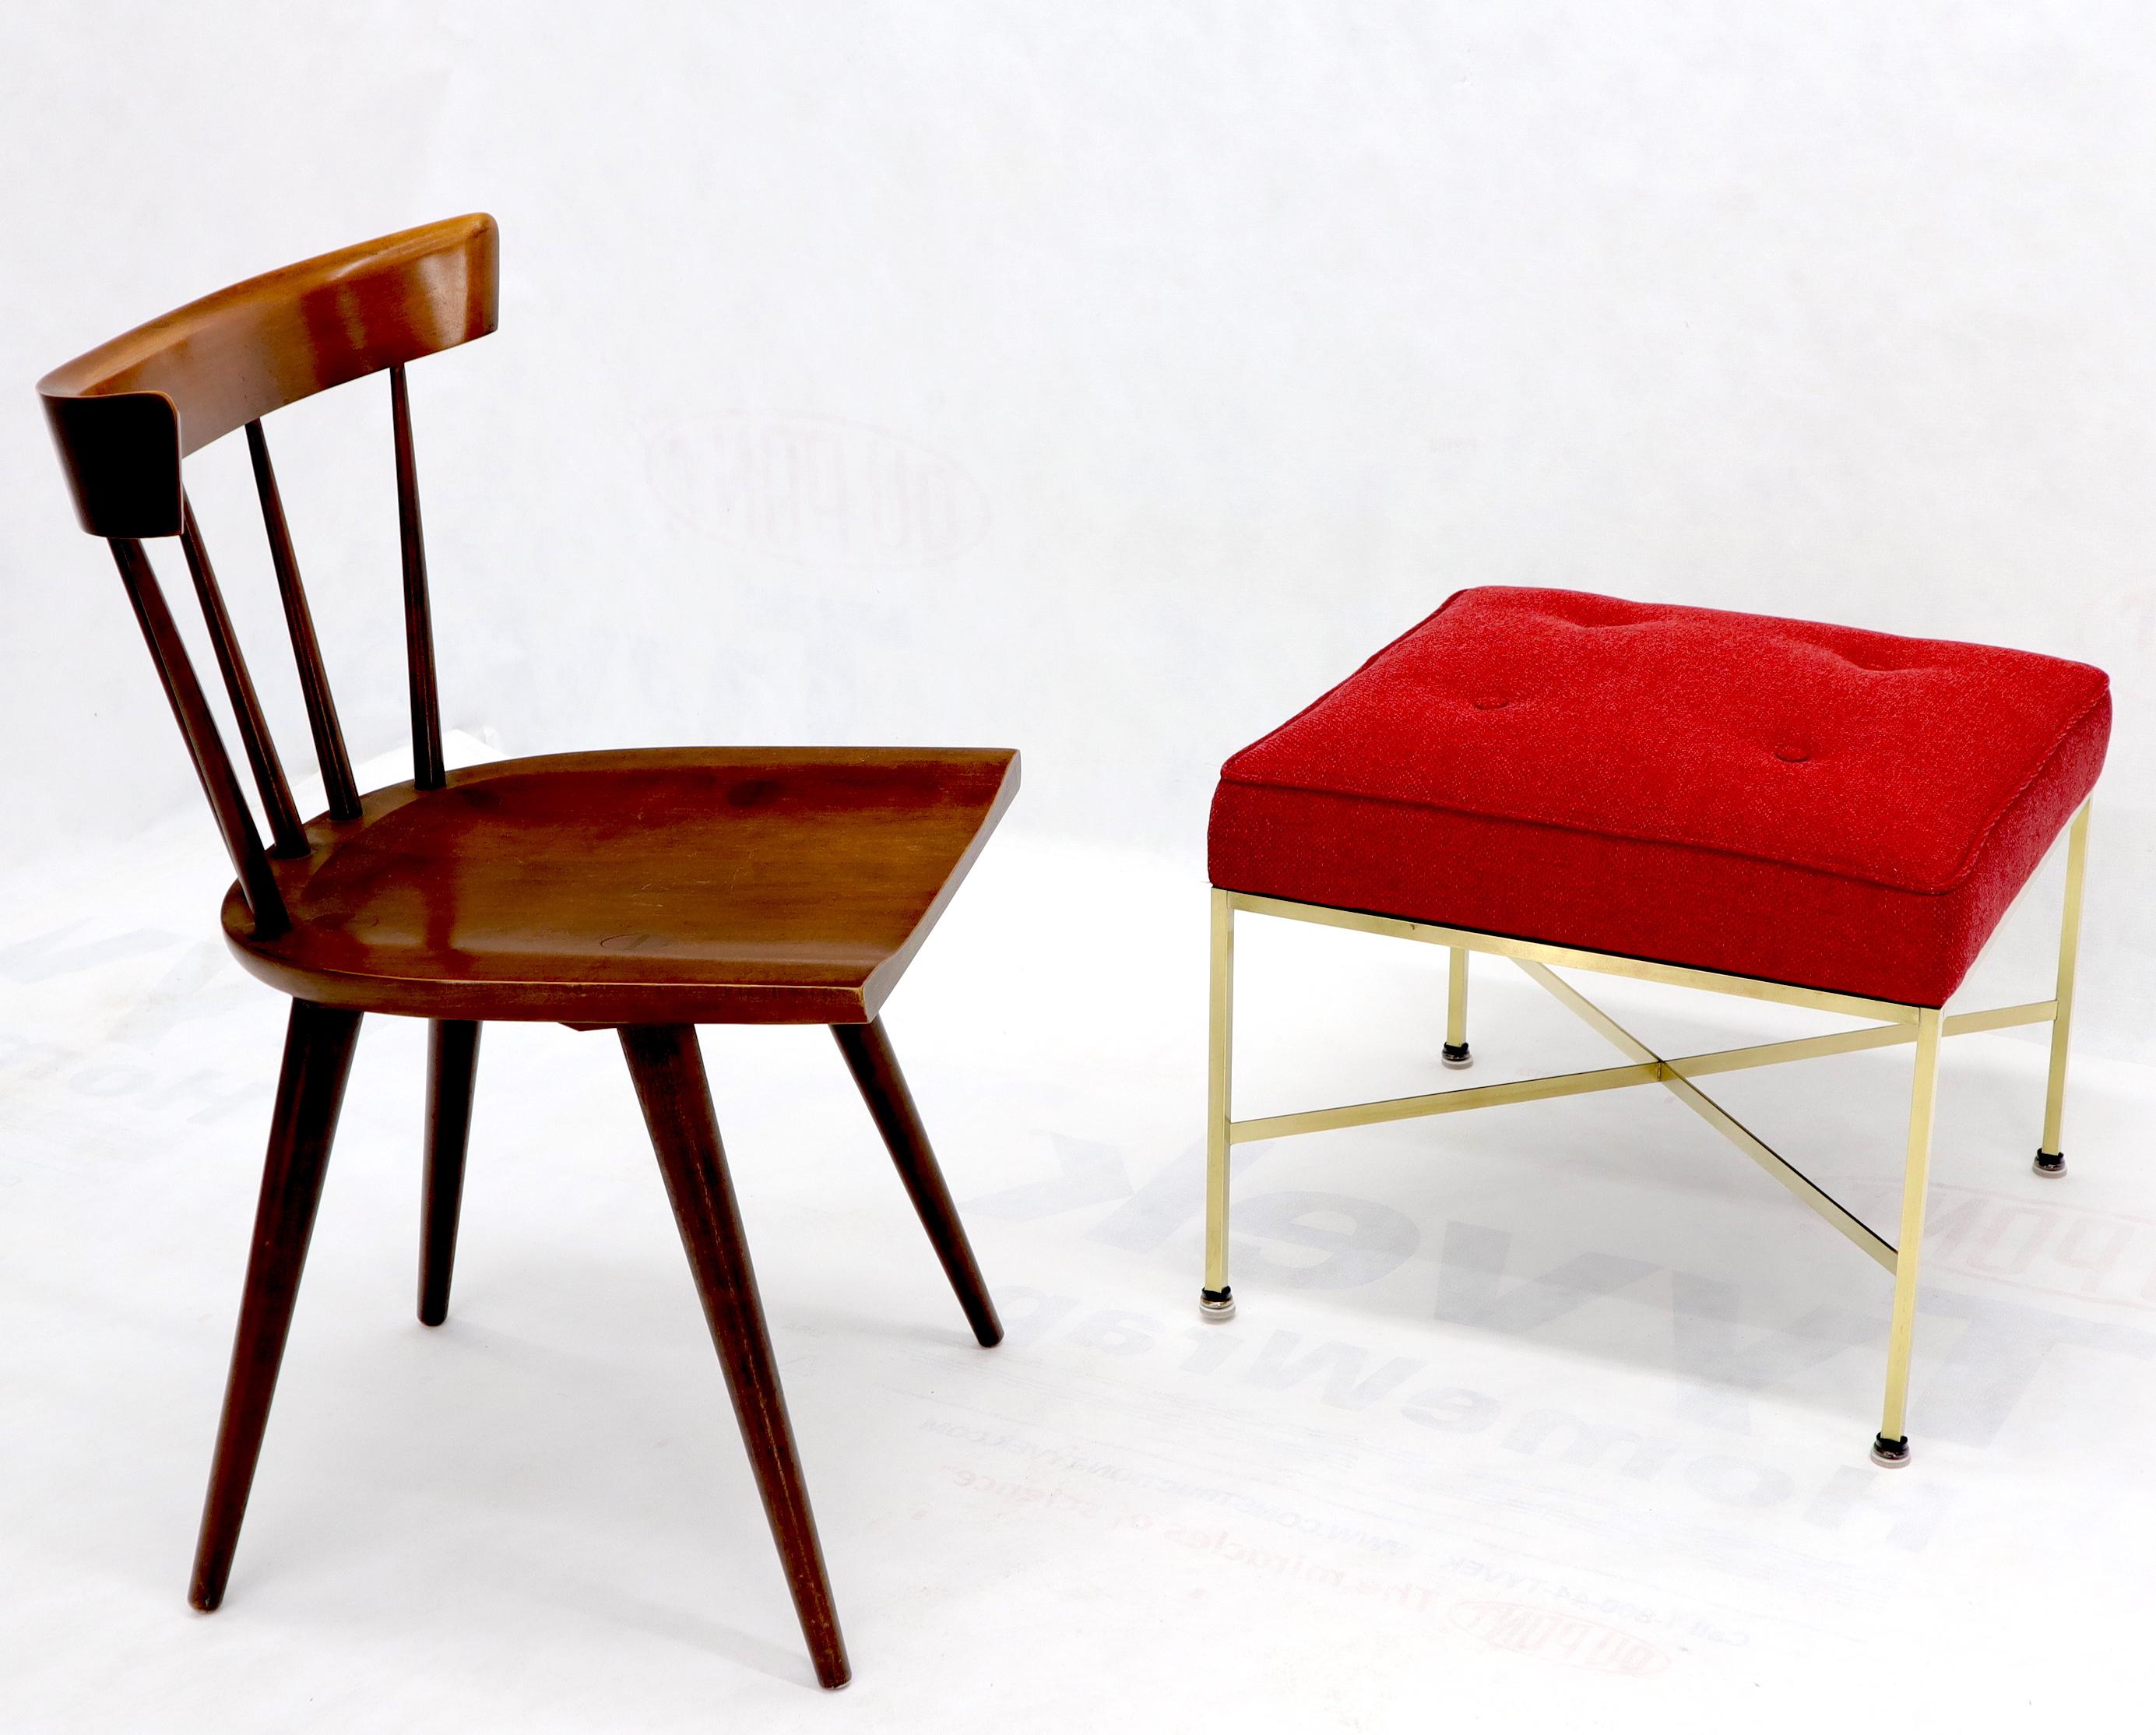 Pair of Mid-Century Modern brass benches by Paul McCobb.